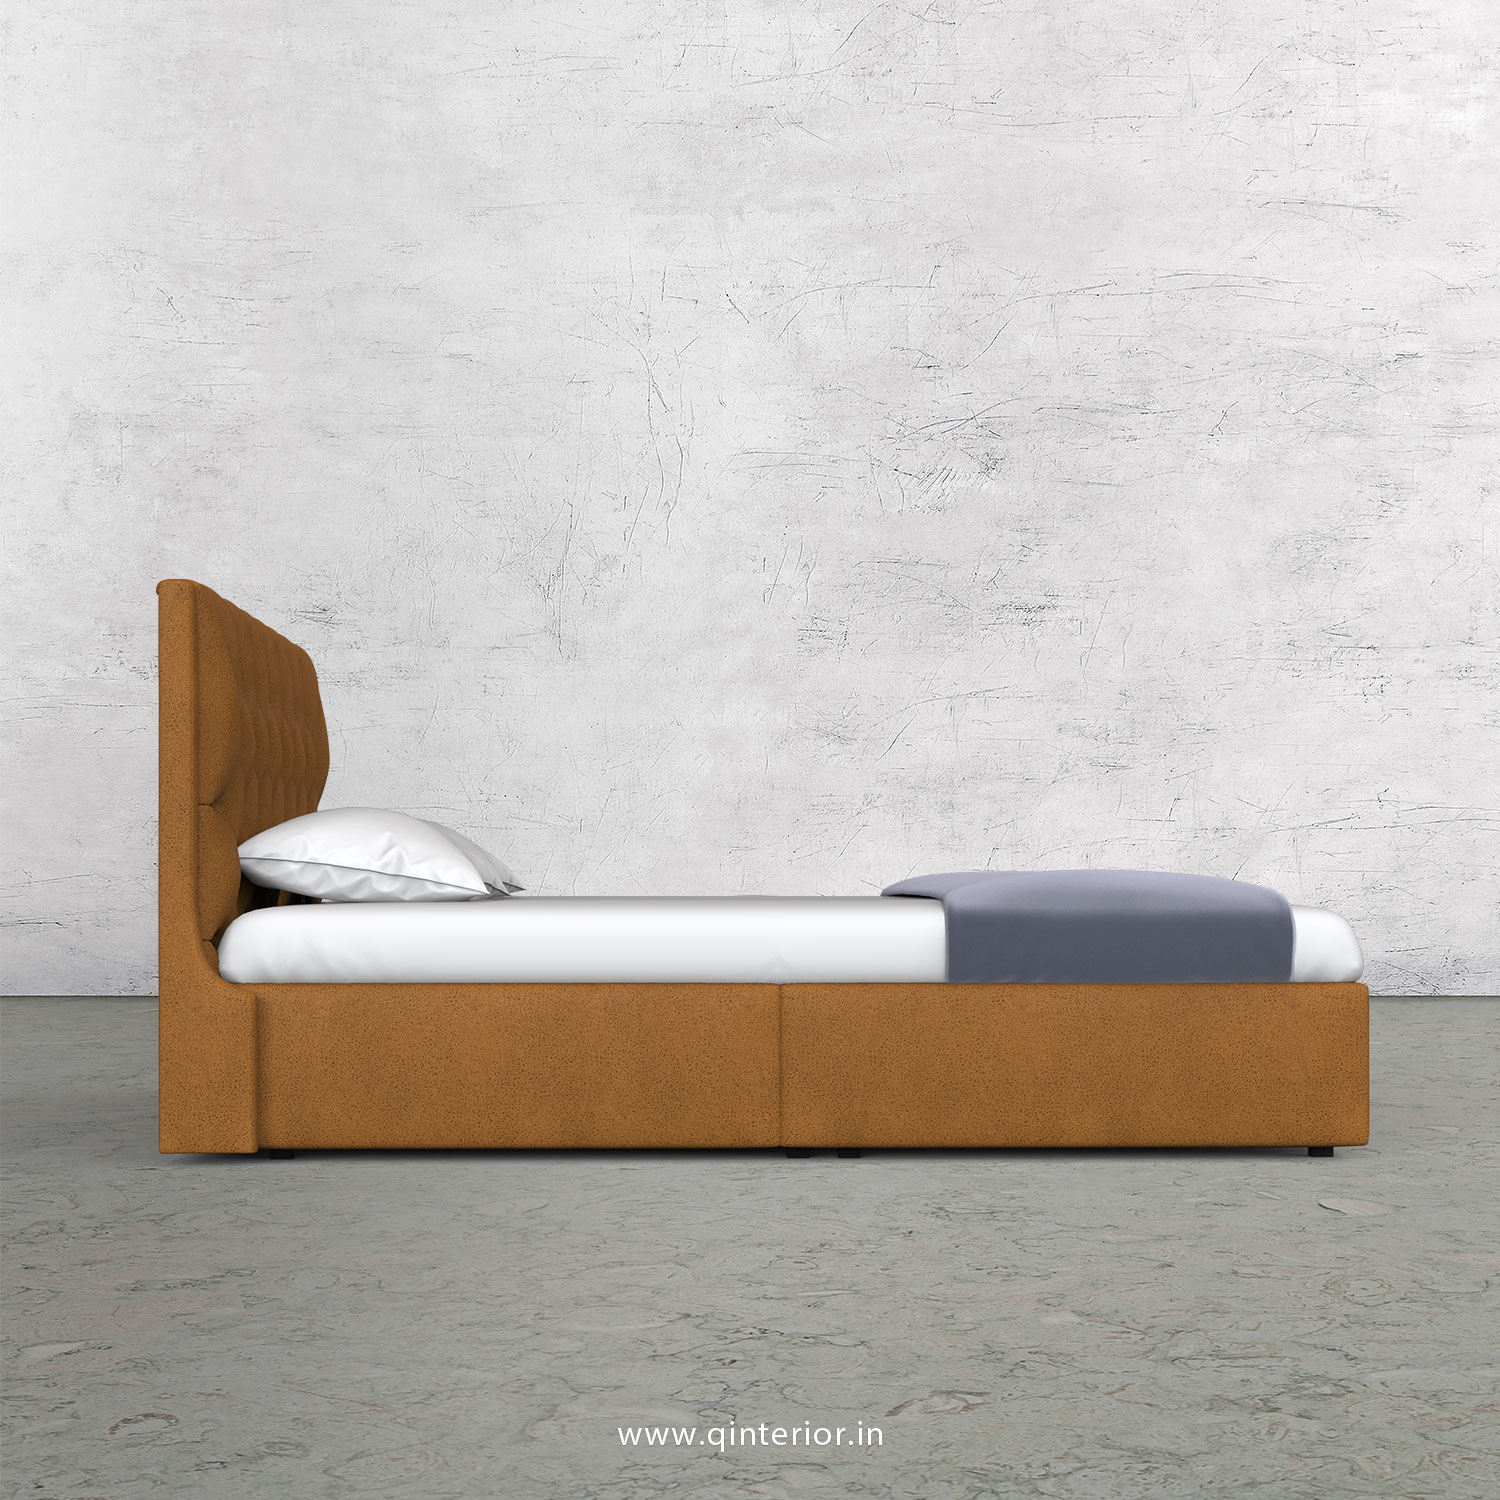 Scorpius Queen Bed in Fab Leather Fabric - QBD009 FL14